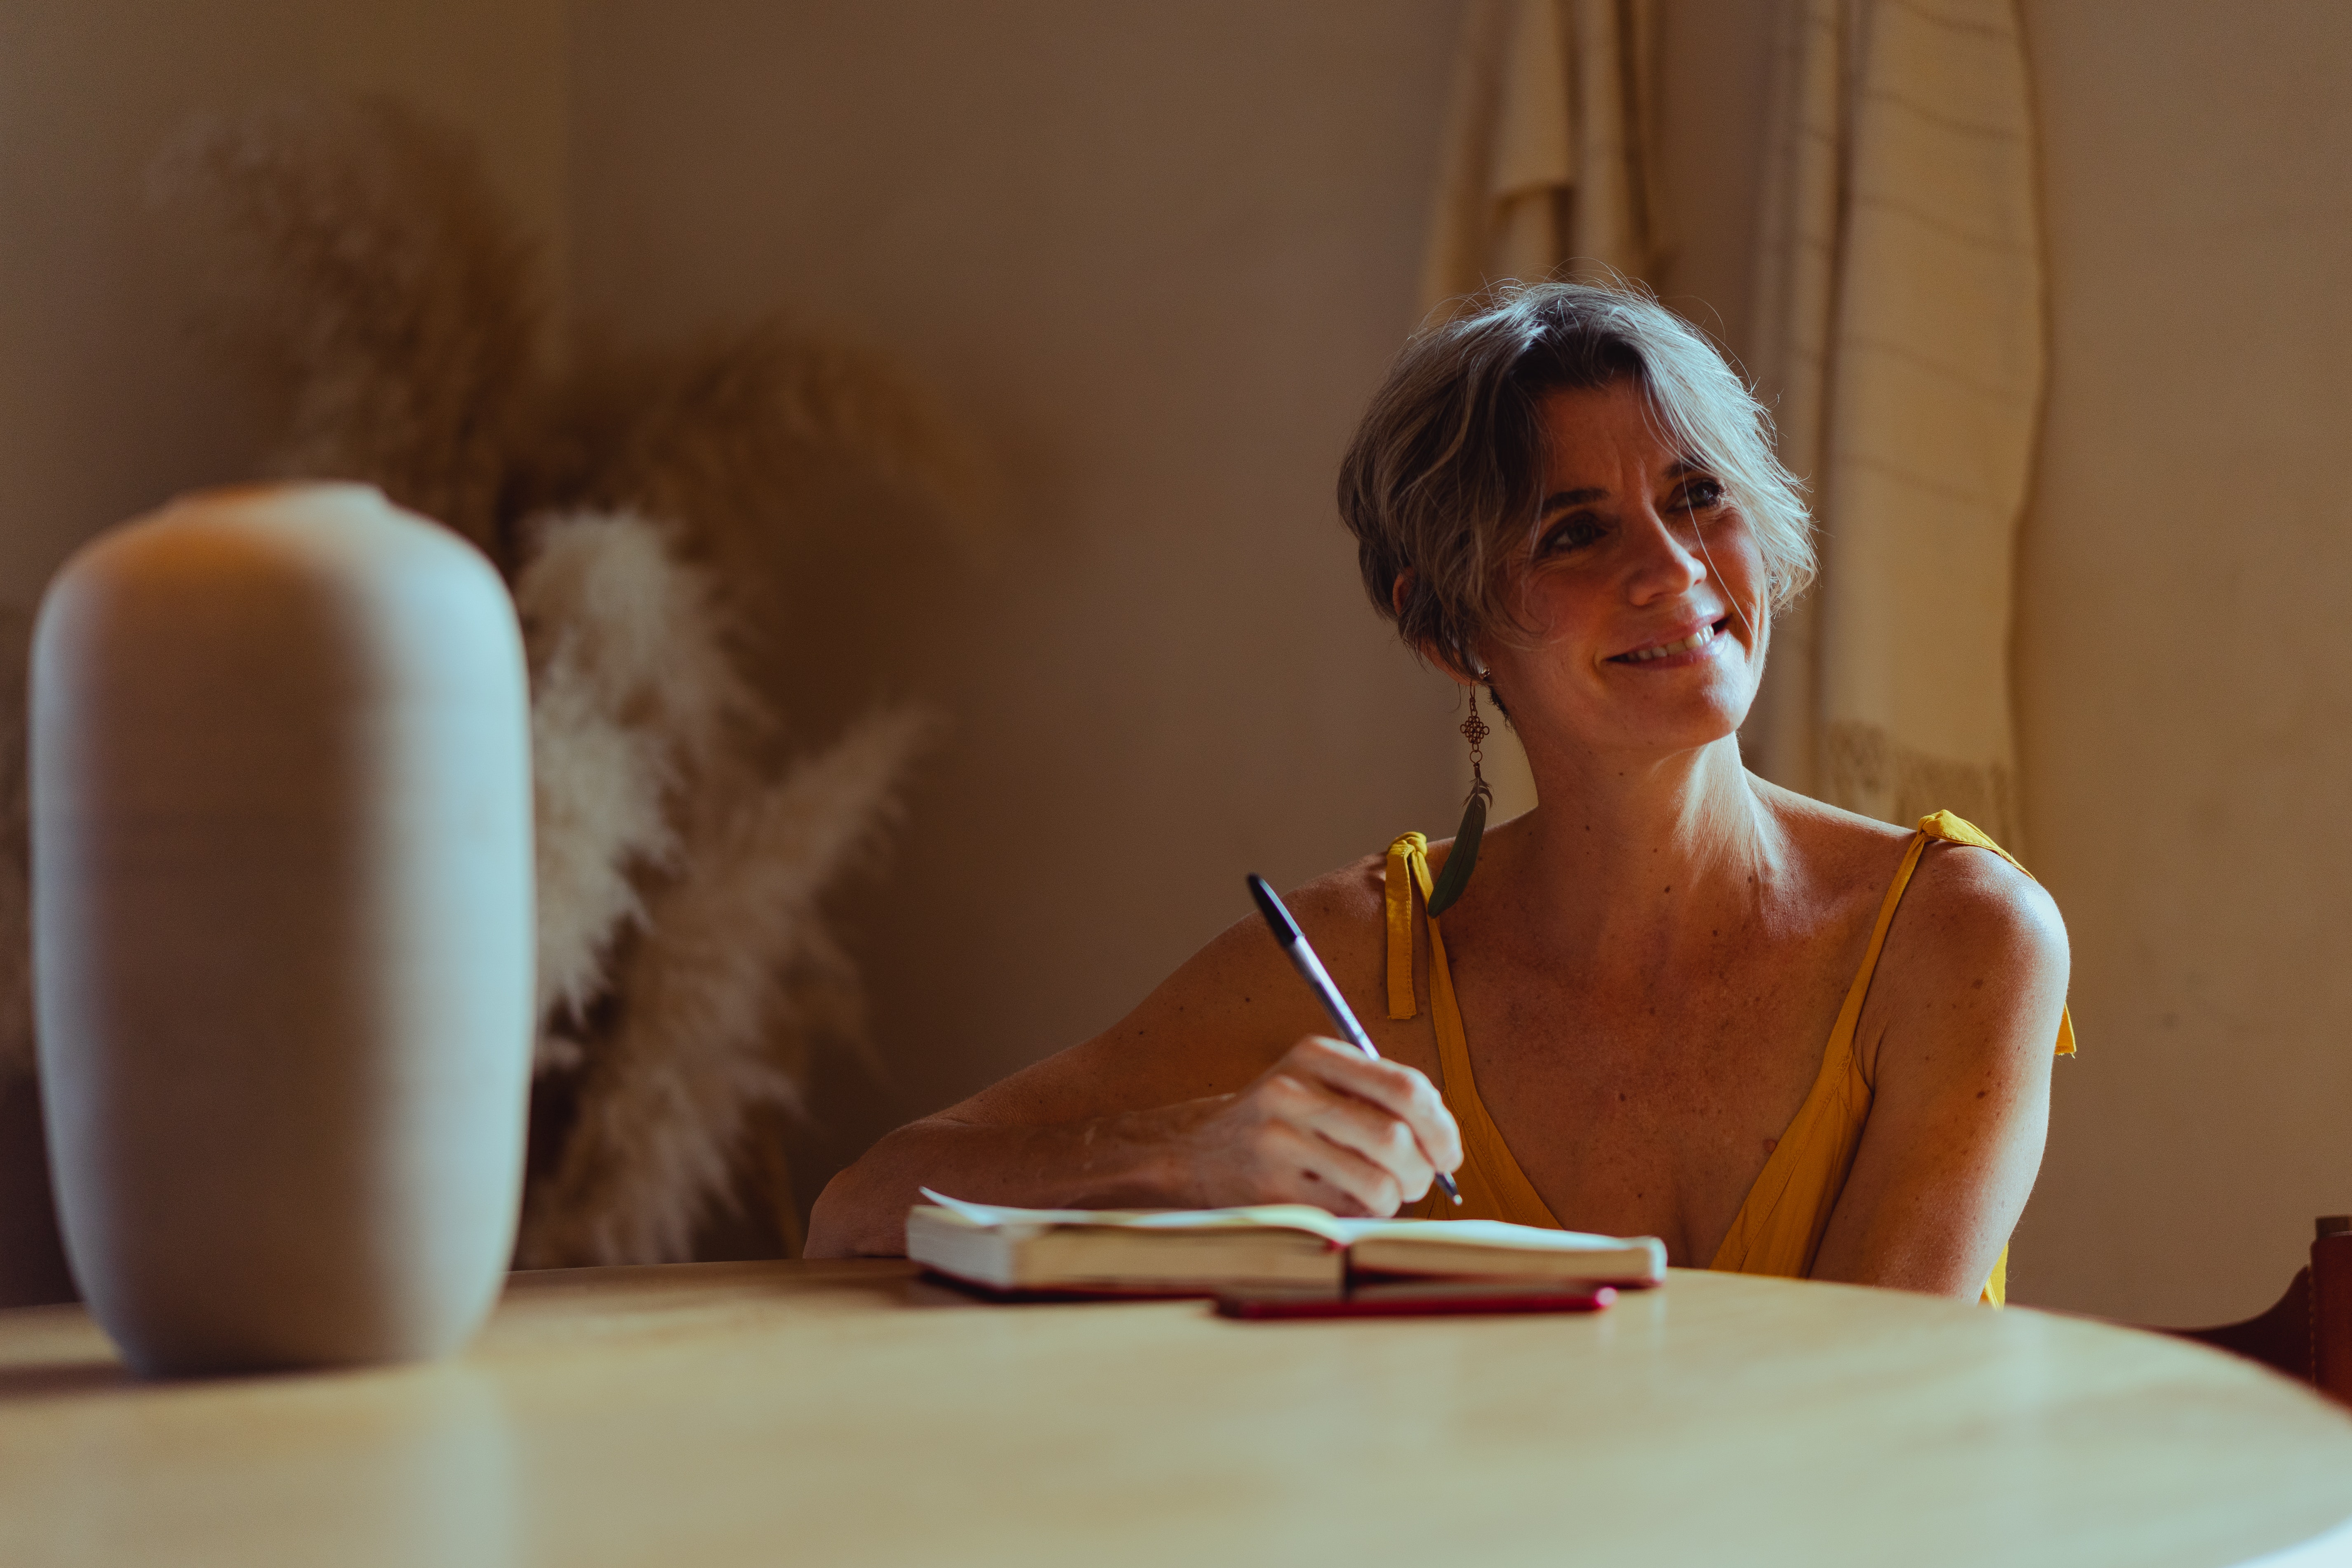 Williamsburg Therapy Group woman sitting at table smiling and journaling